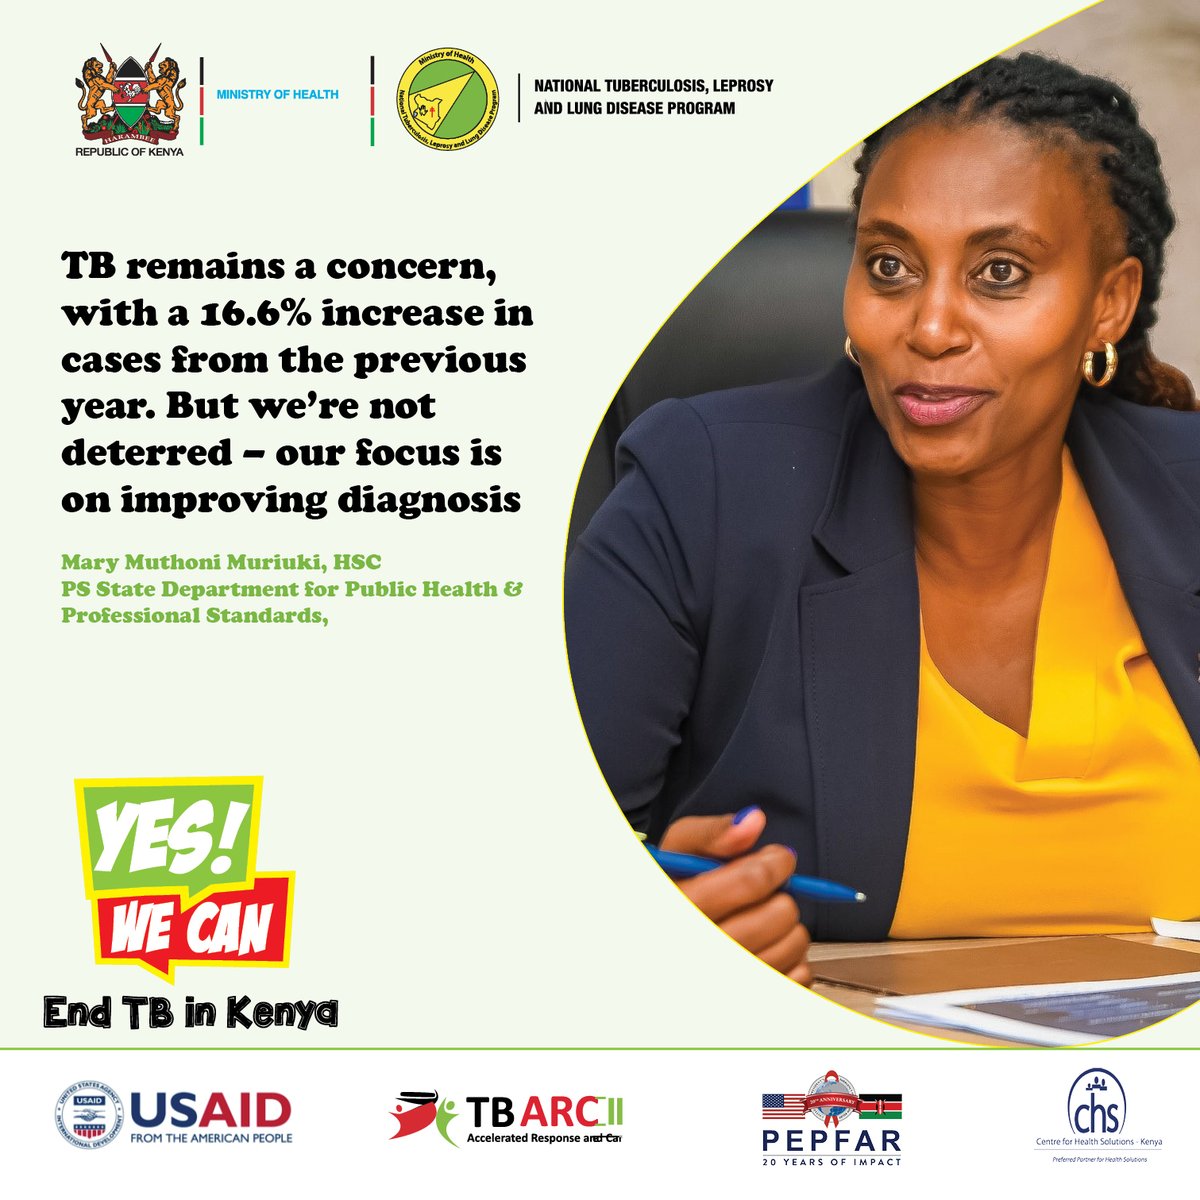 Enhanced TB diagnosis is a game-changer in Kenya's fight against this formidable disease. Early and accurate detection saves lives, stops transmission, and paves the way to a #TBFreeKenya #YesWeCanEndTBinKenya #ThinkTestTreatTB